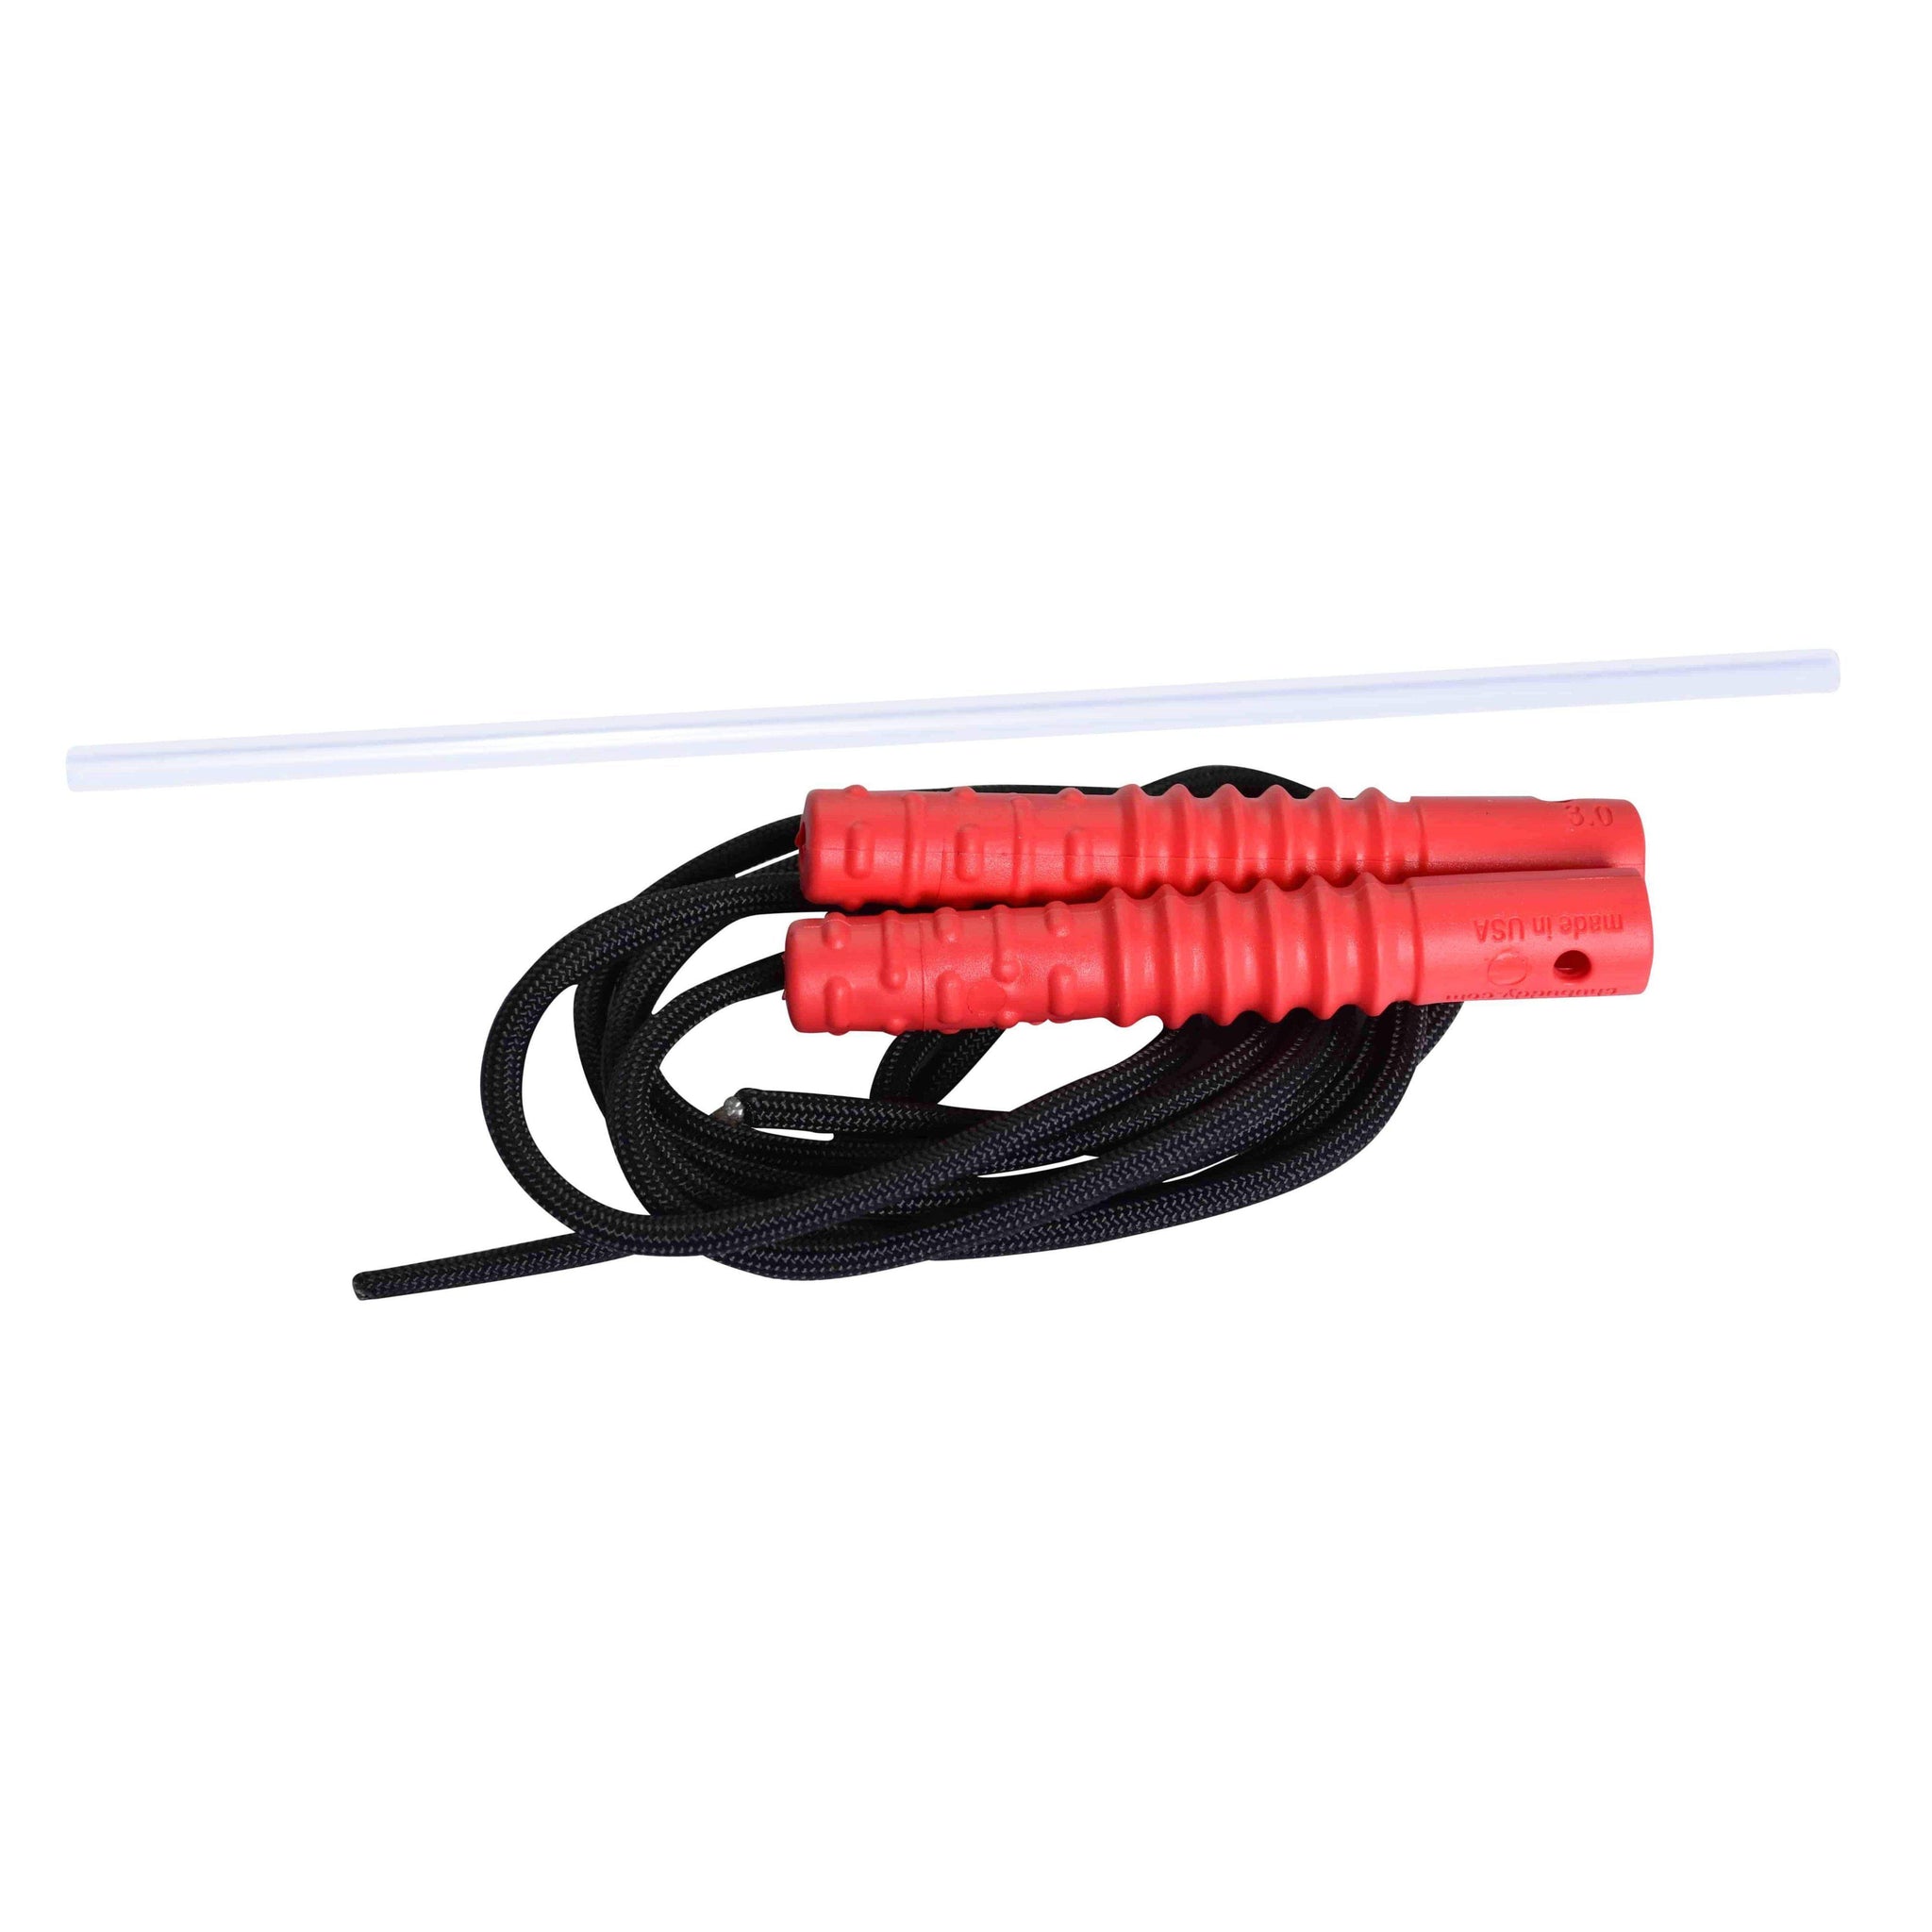 ChuBuddy Red Cord Zilla with Black Cord and Install Pack